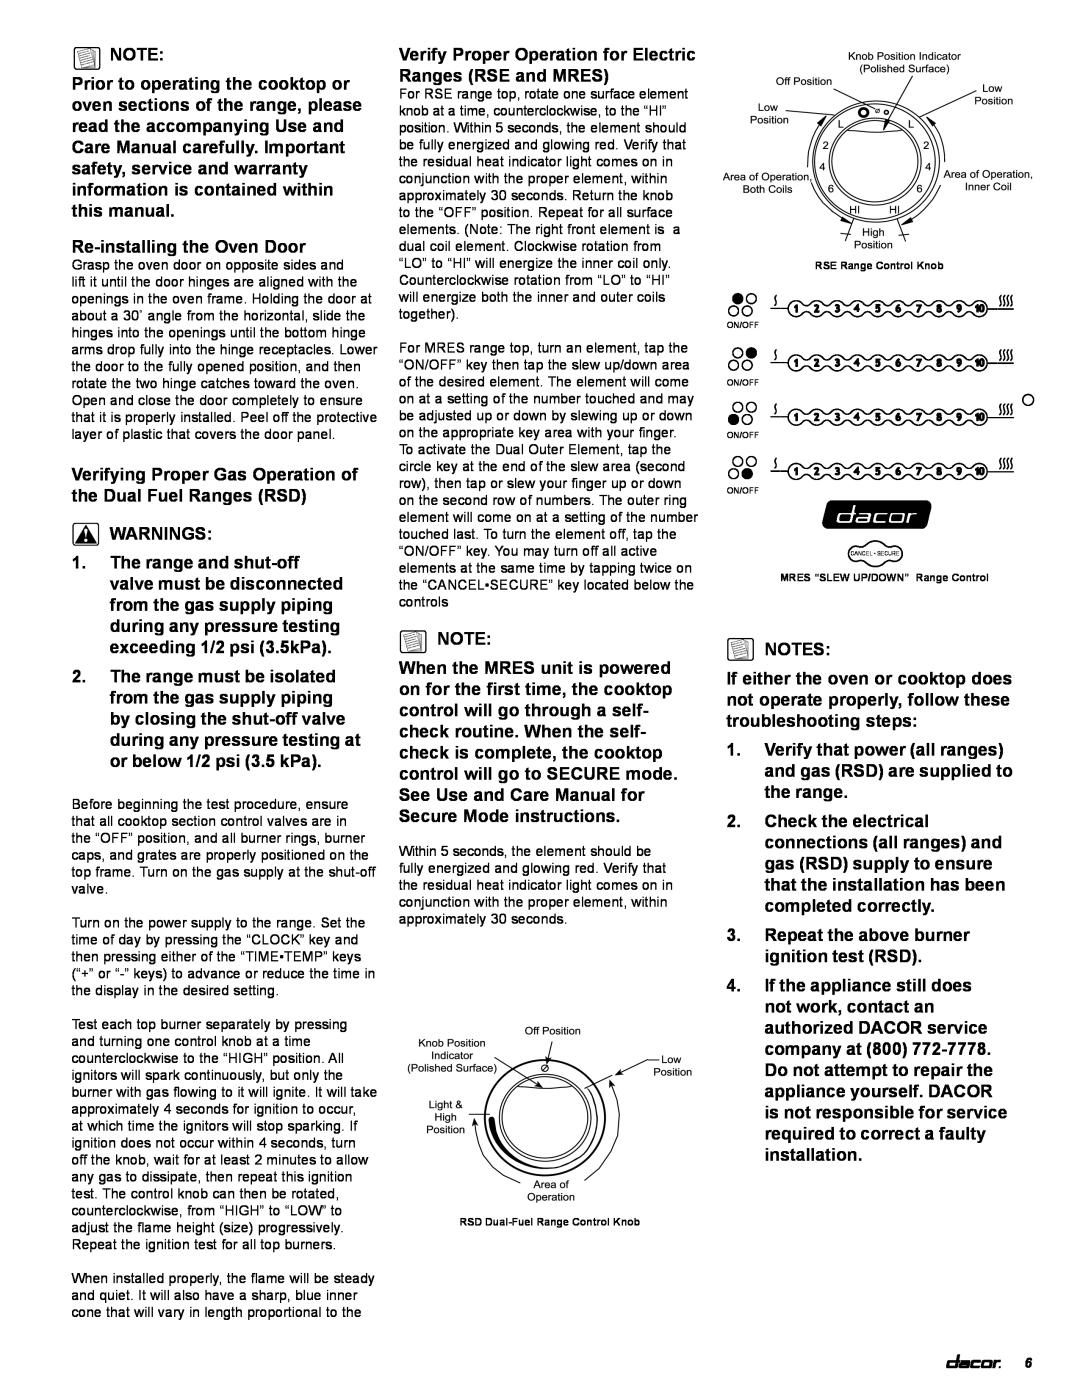 Dacor RSE30, rsd30, MRES30 installation instructions Re-installing the Oven Door 